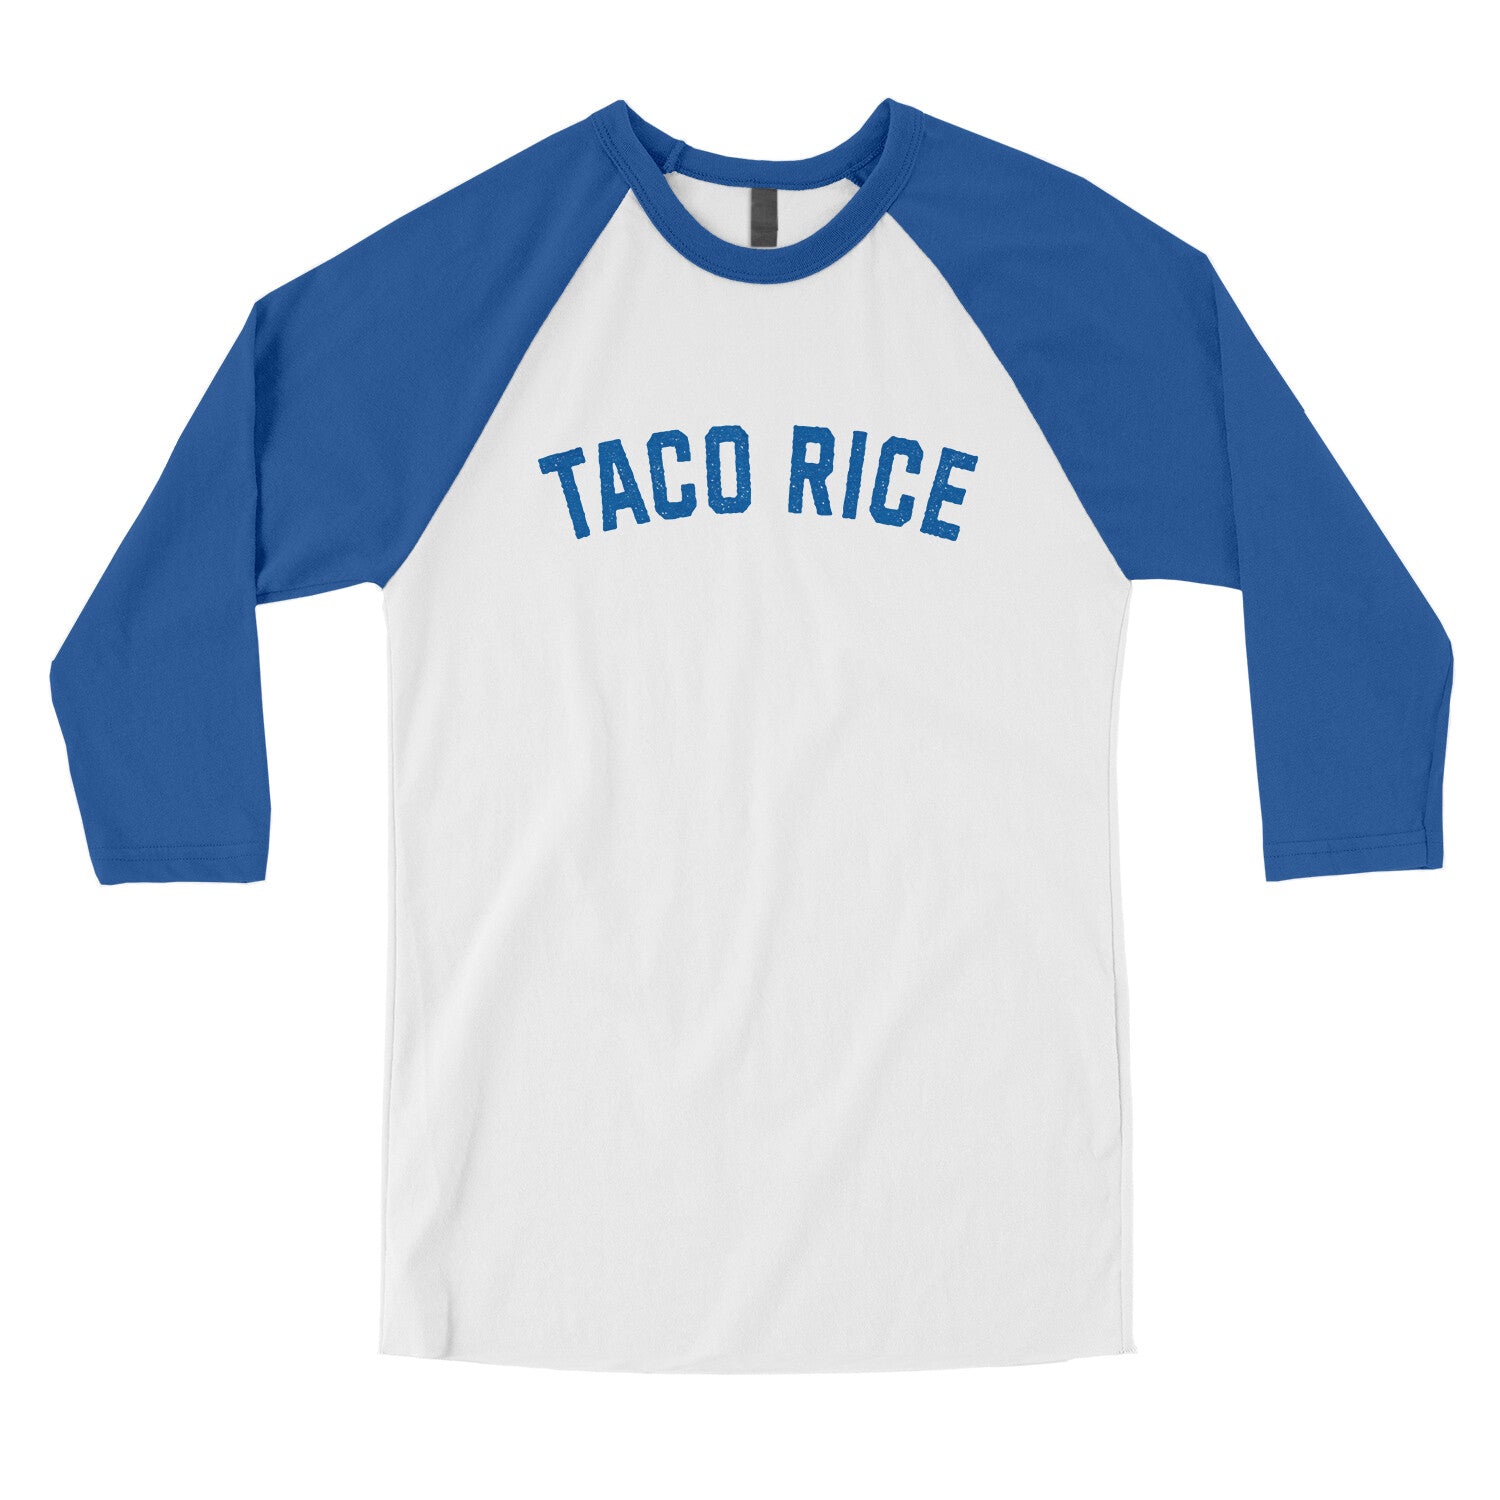 Taco Rice in White with True Royal Color